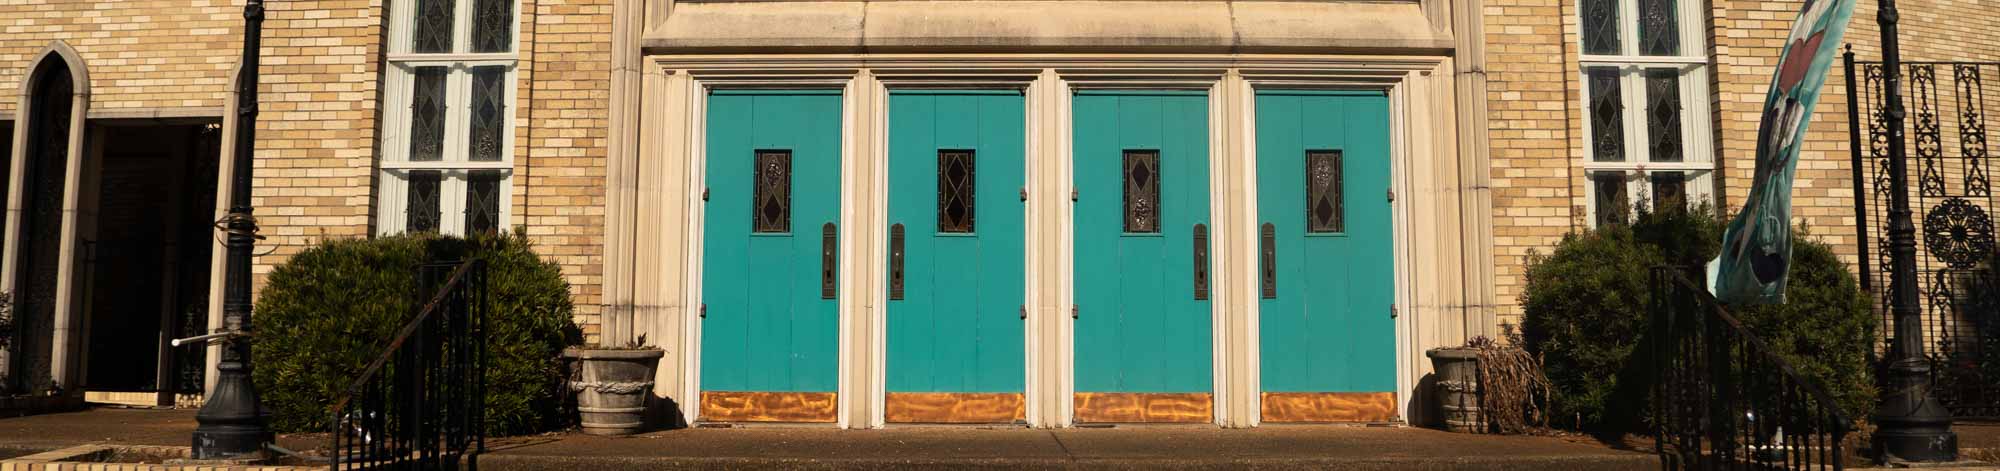 Central Midtown Turquoise Doors